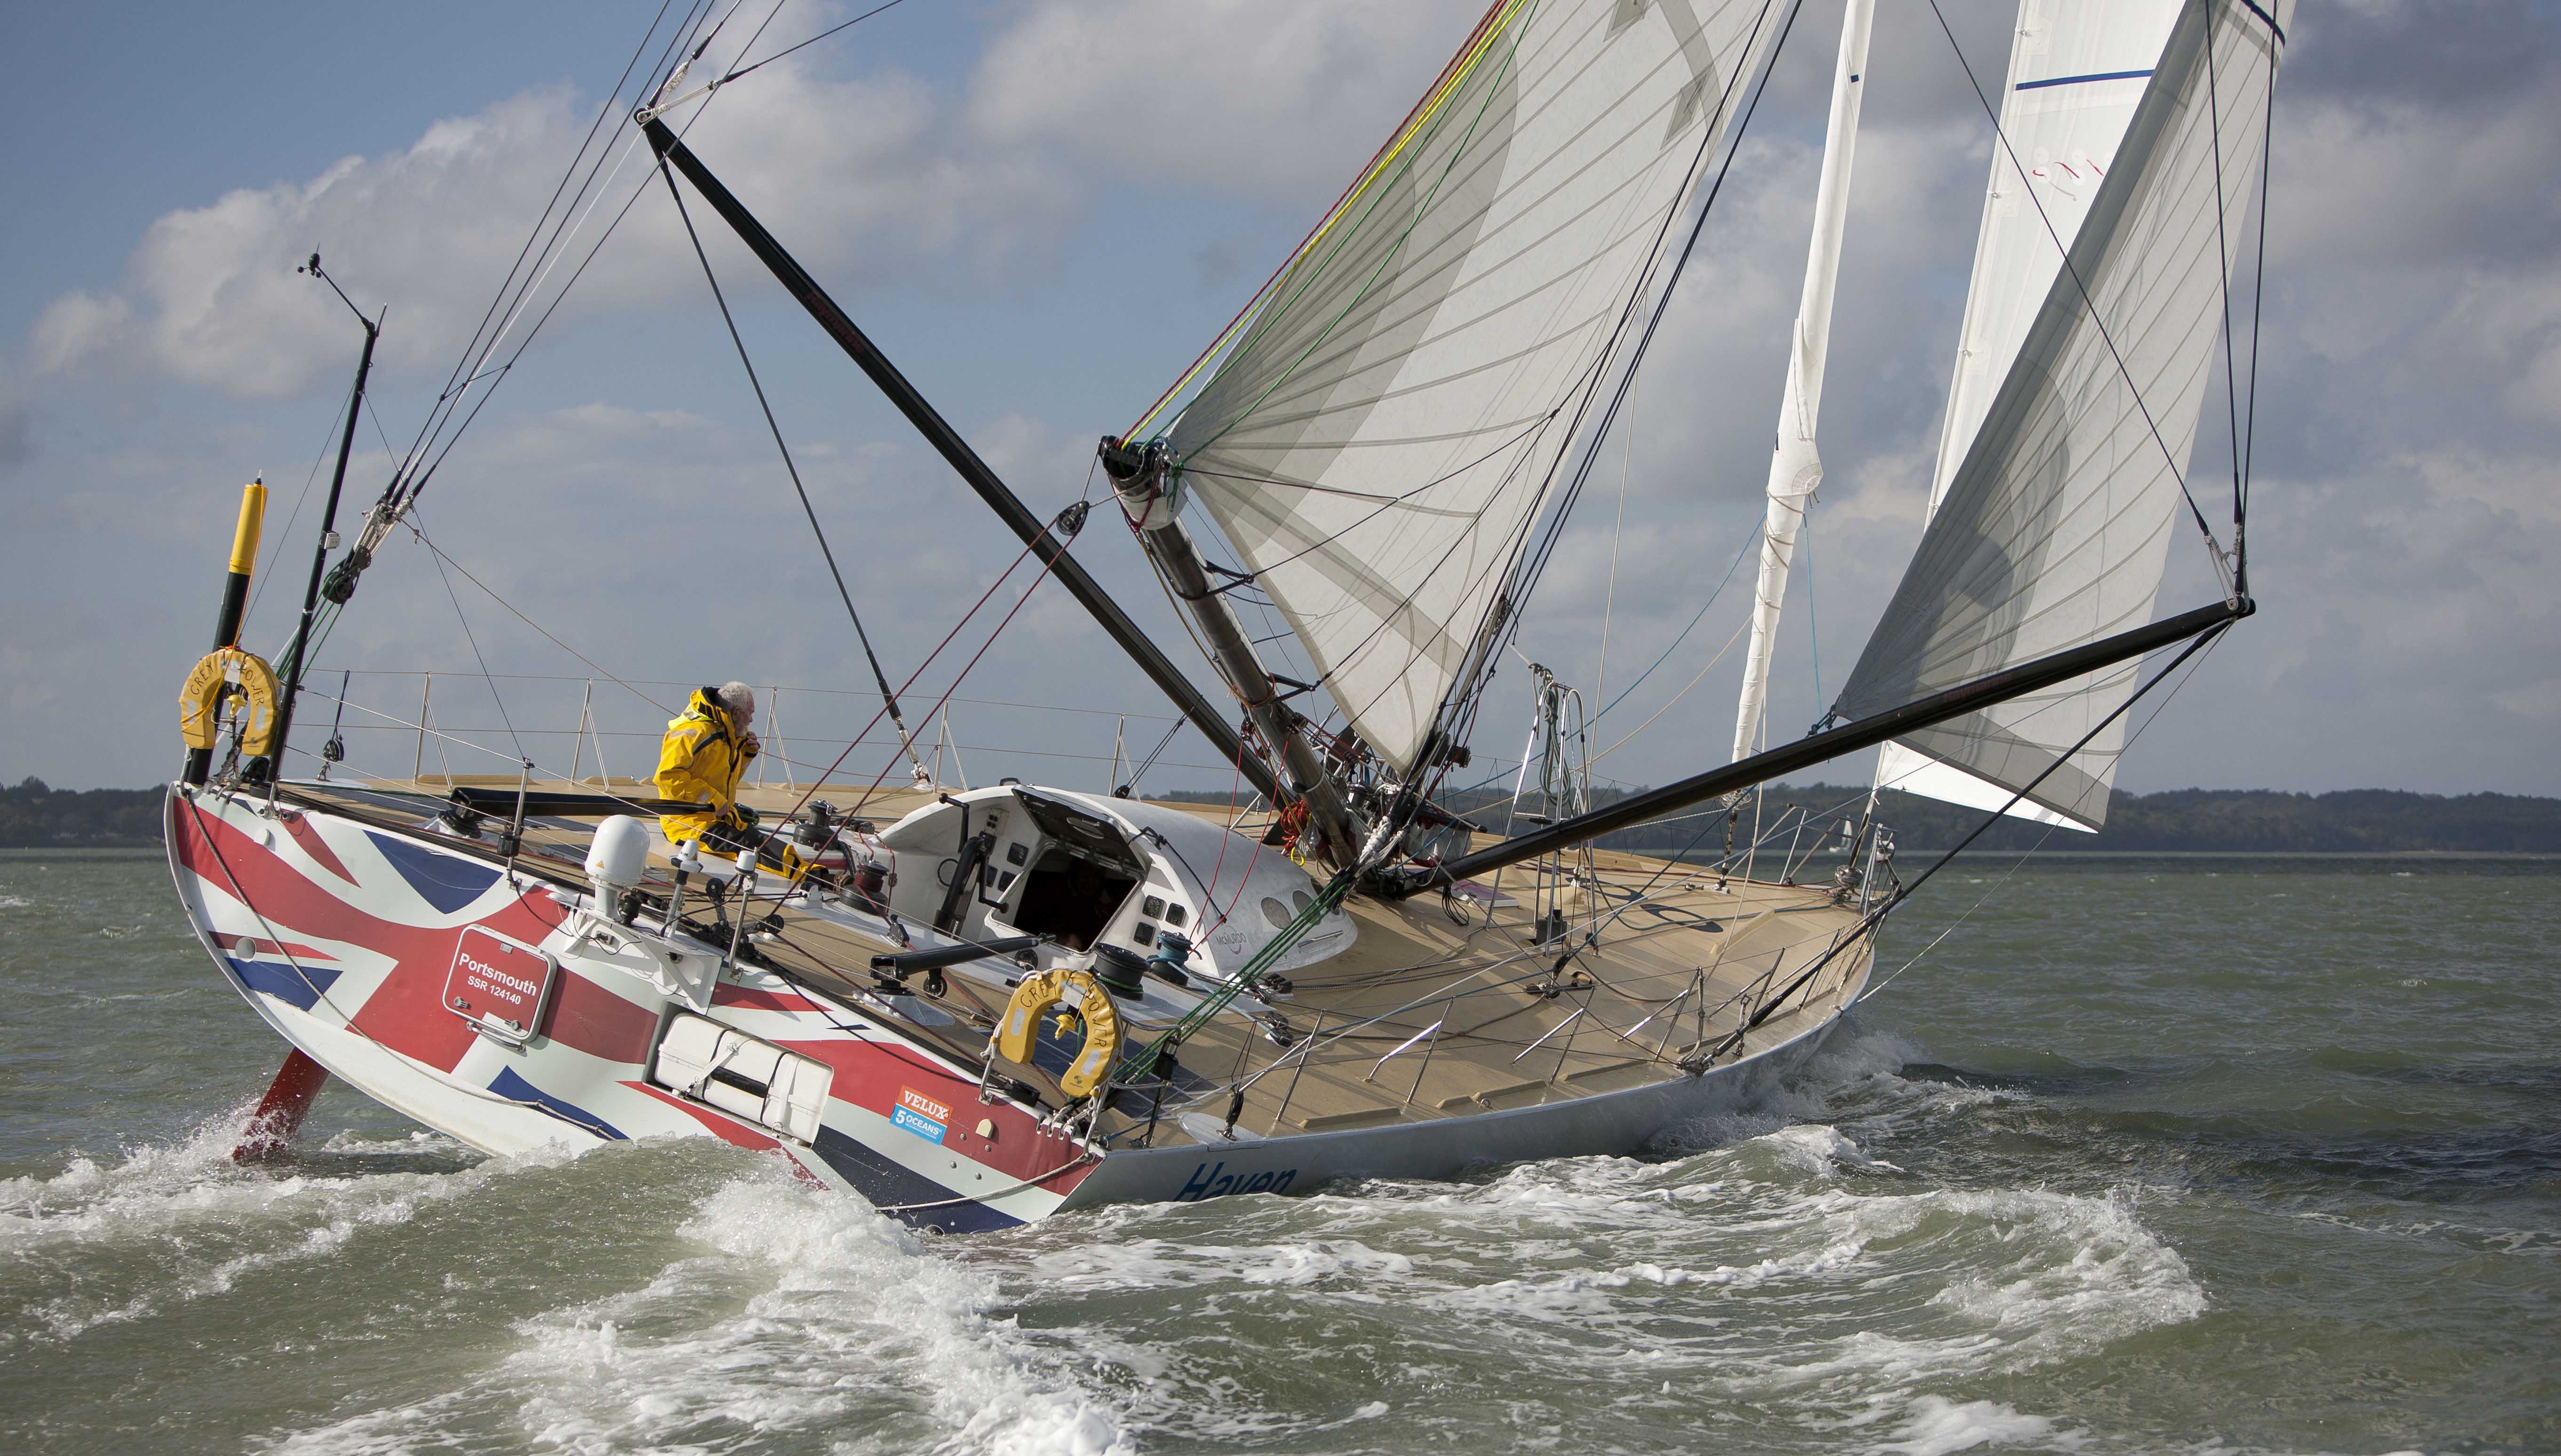 Sir Robin Knox-Johnston speeds up as he enters Bay of Biscay